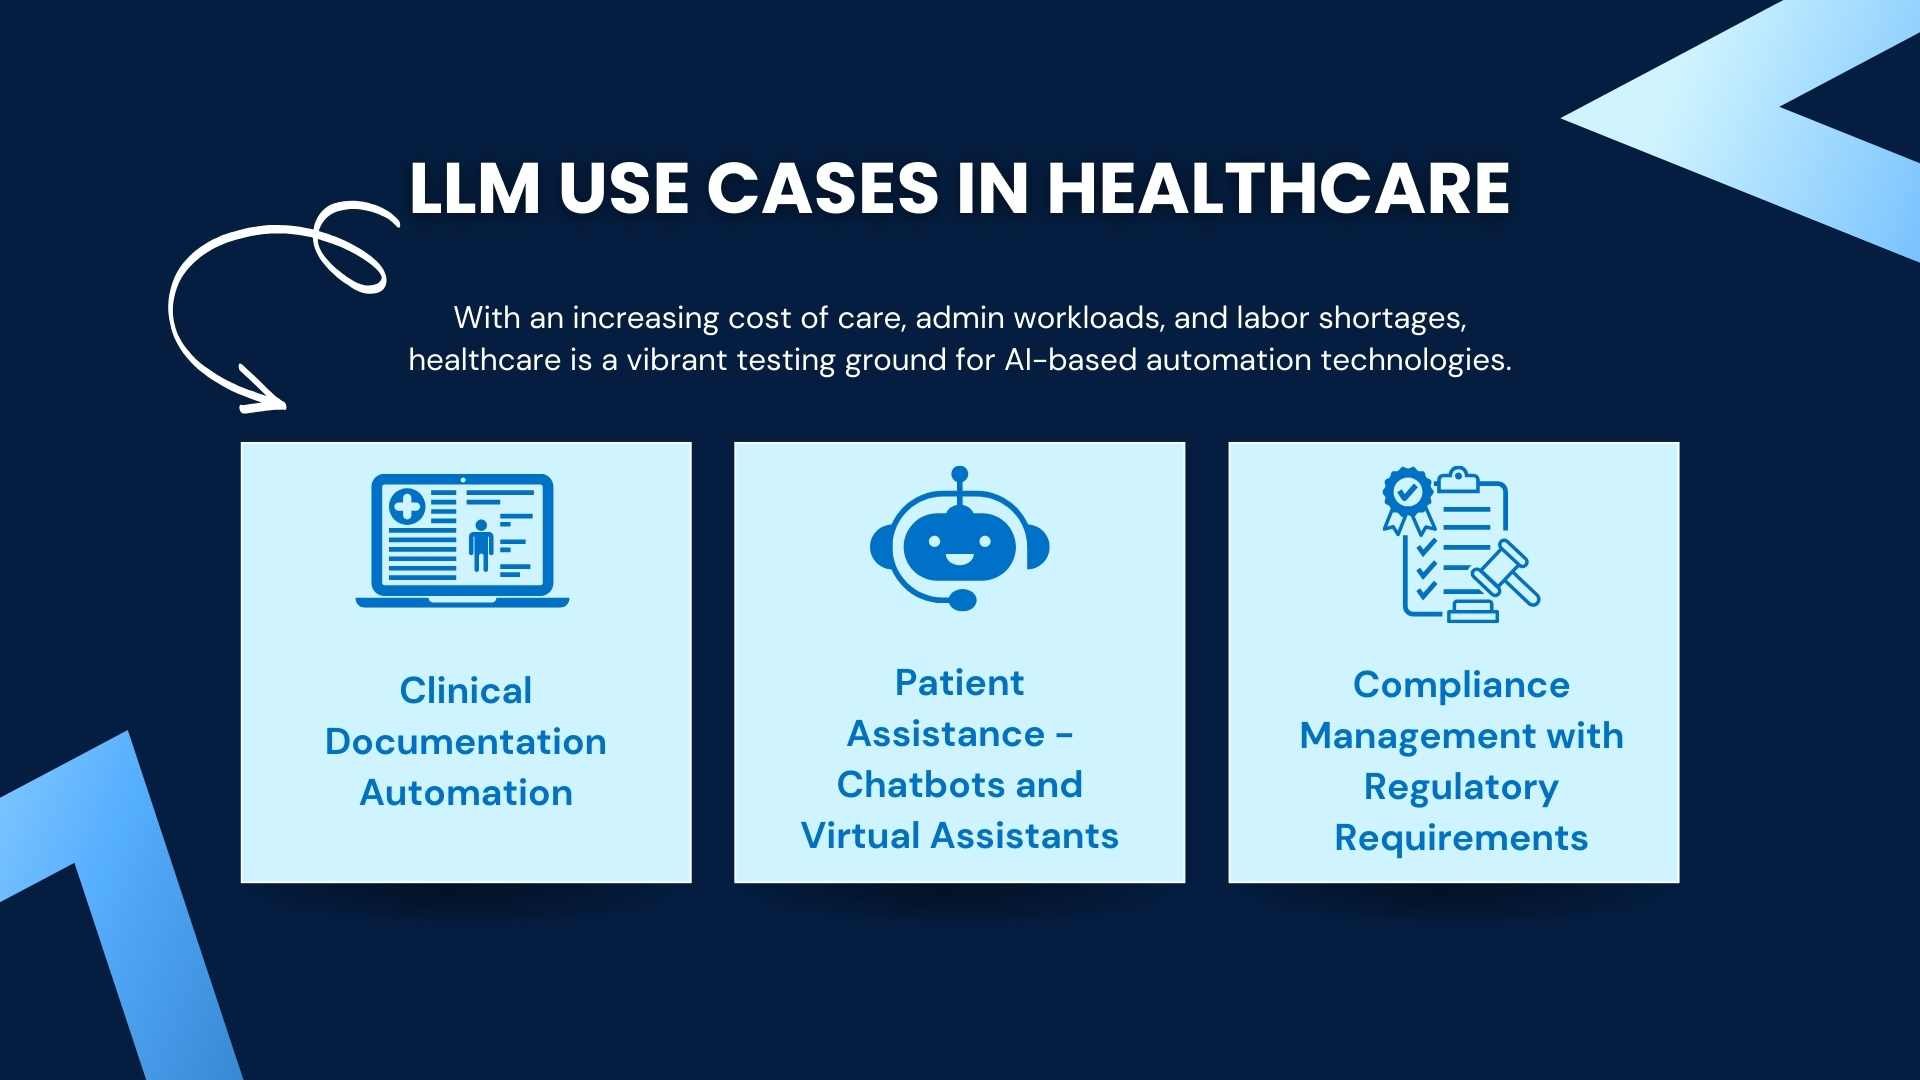 LLM Use Cases in Healthcare